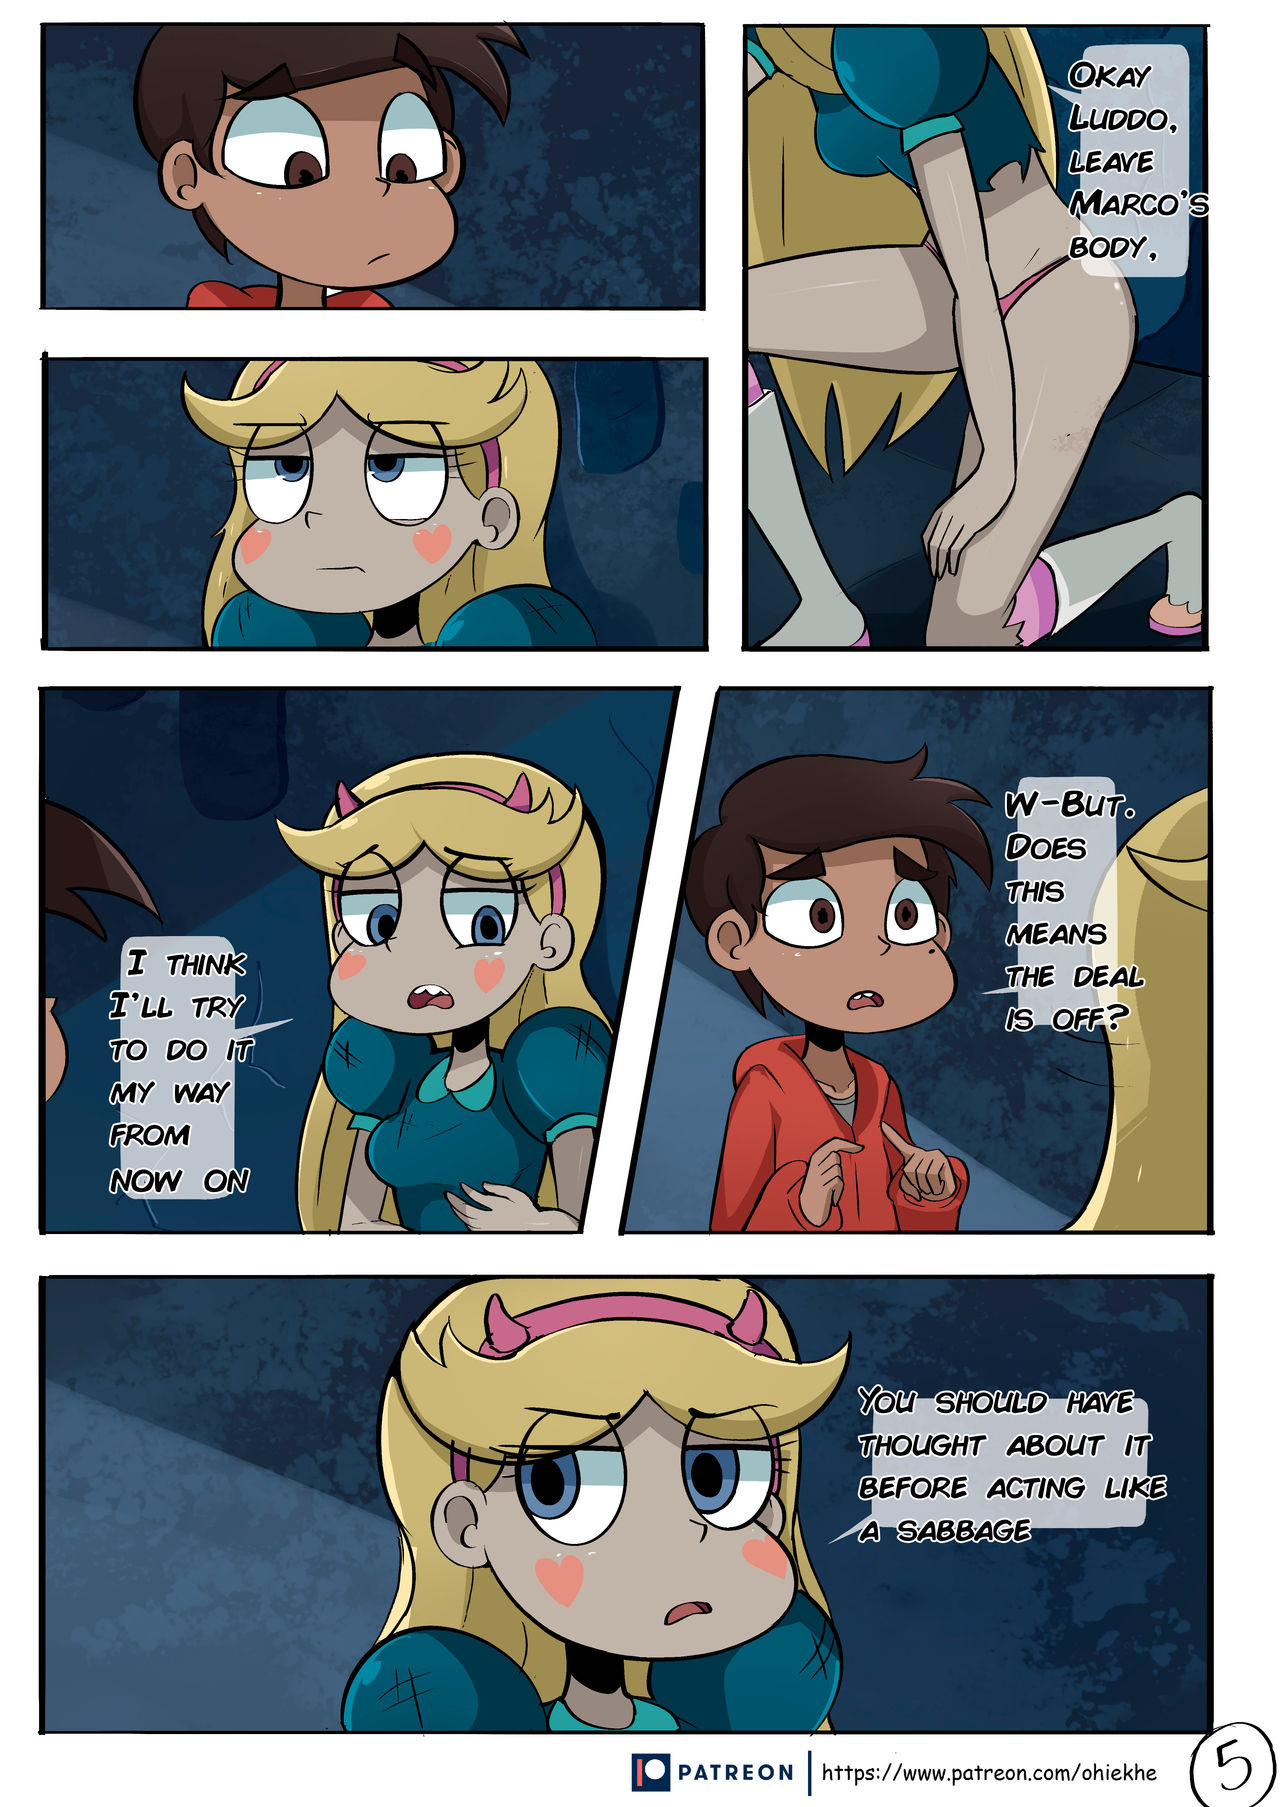 Marco and star porn comic